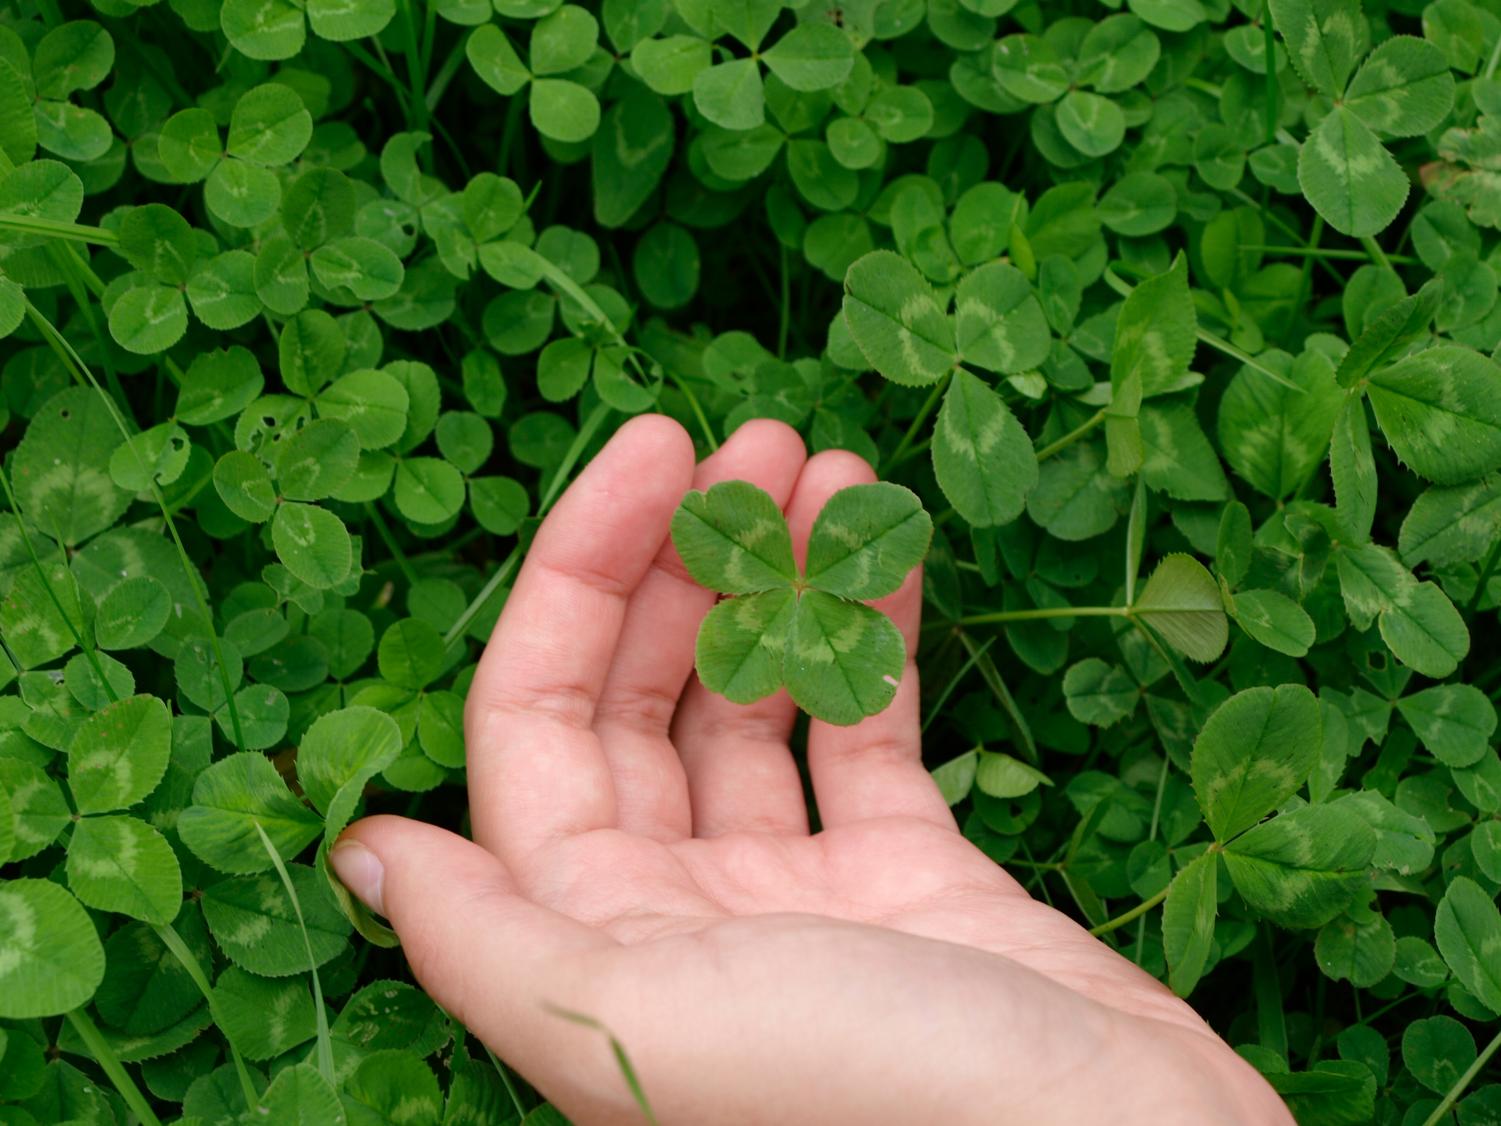 The Luck of the Irish: The Meaning and Significance of Four Leaf